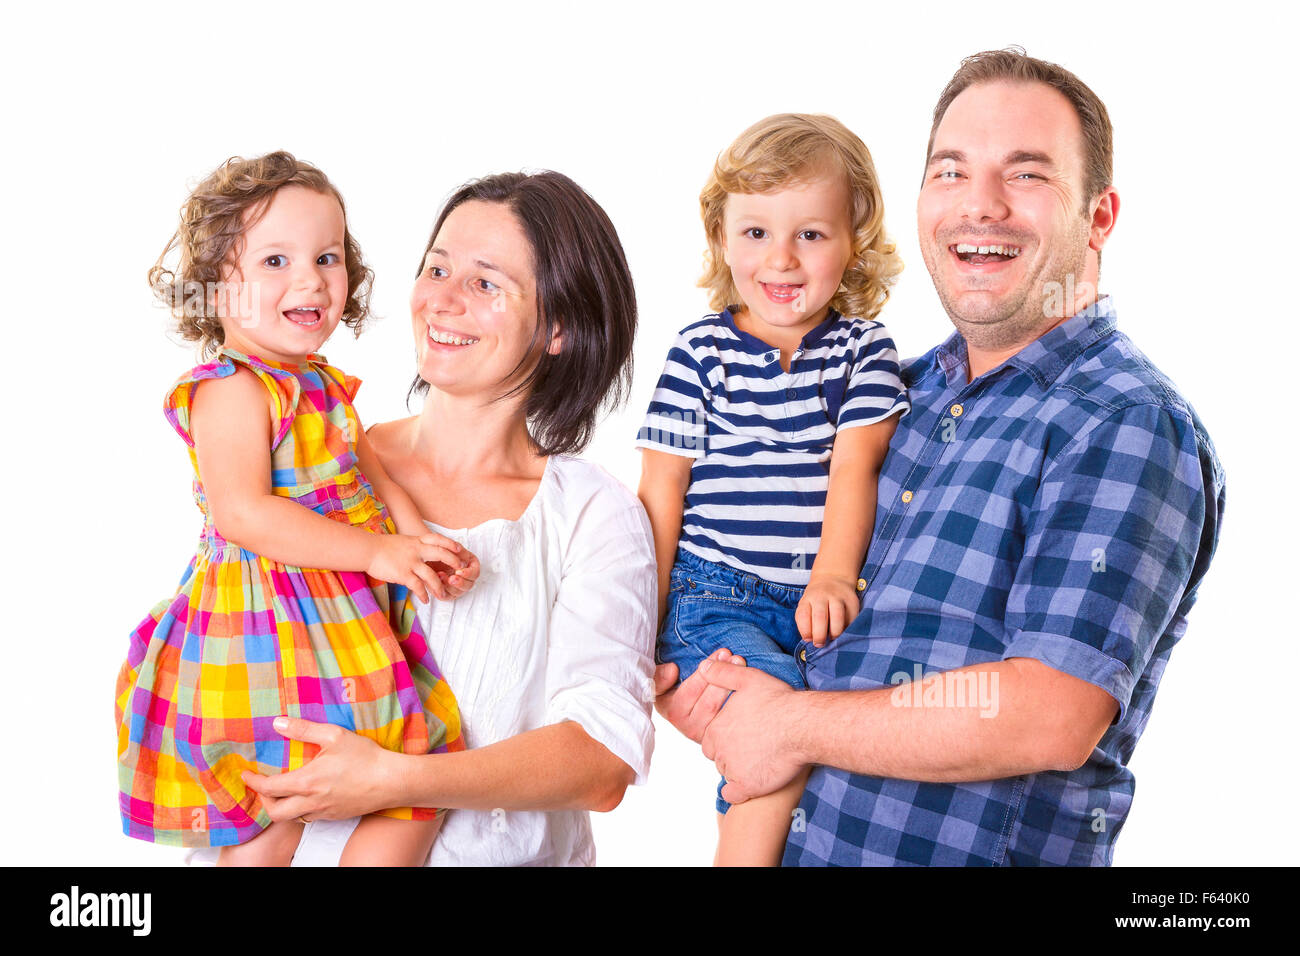 Happy family of four smiling while standing against white background. Stock Photo